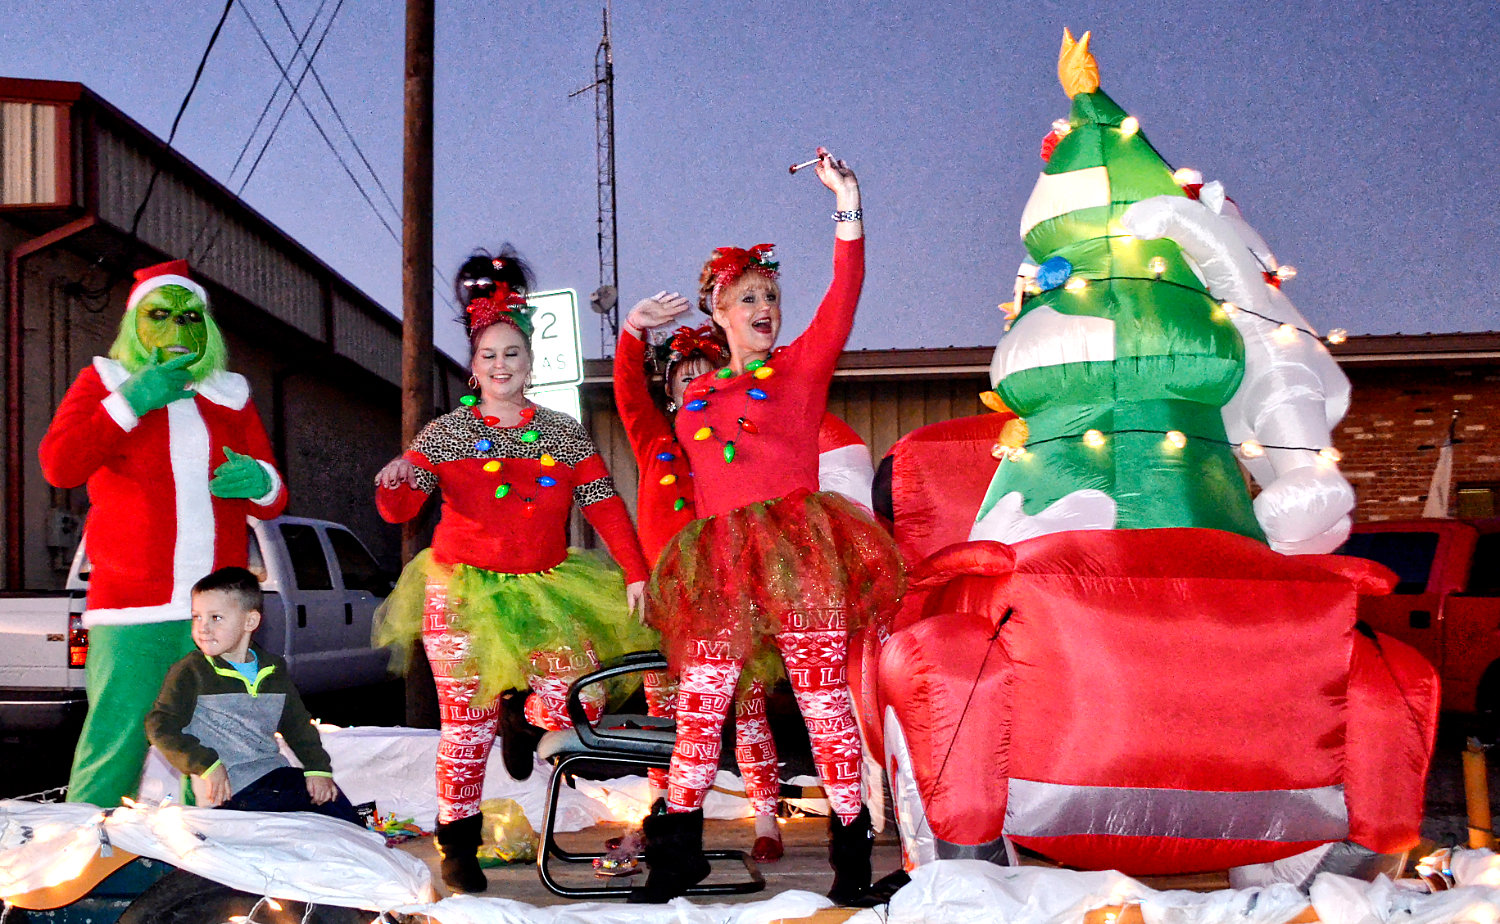 Alba Christmas on the Square was a fun community affair on Saturday.